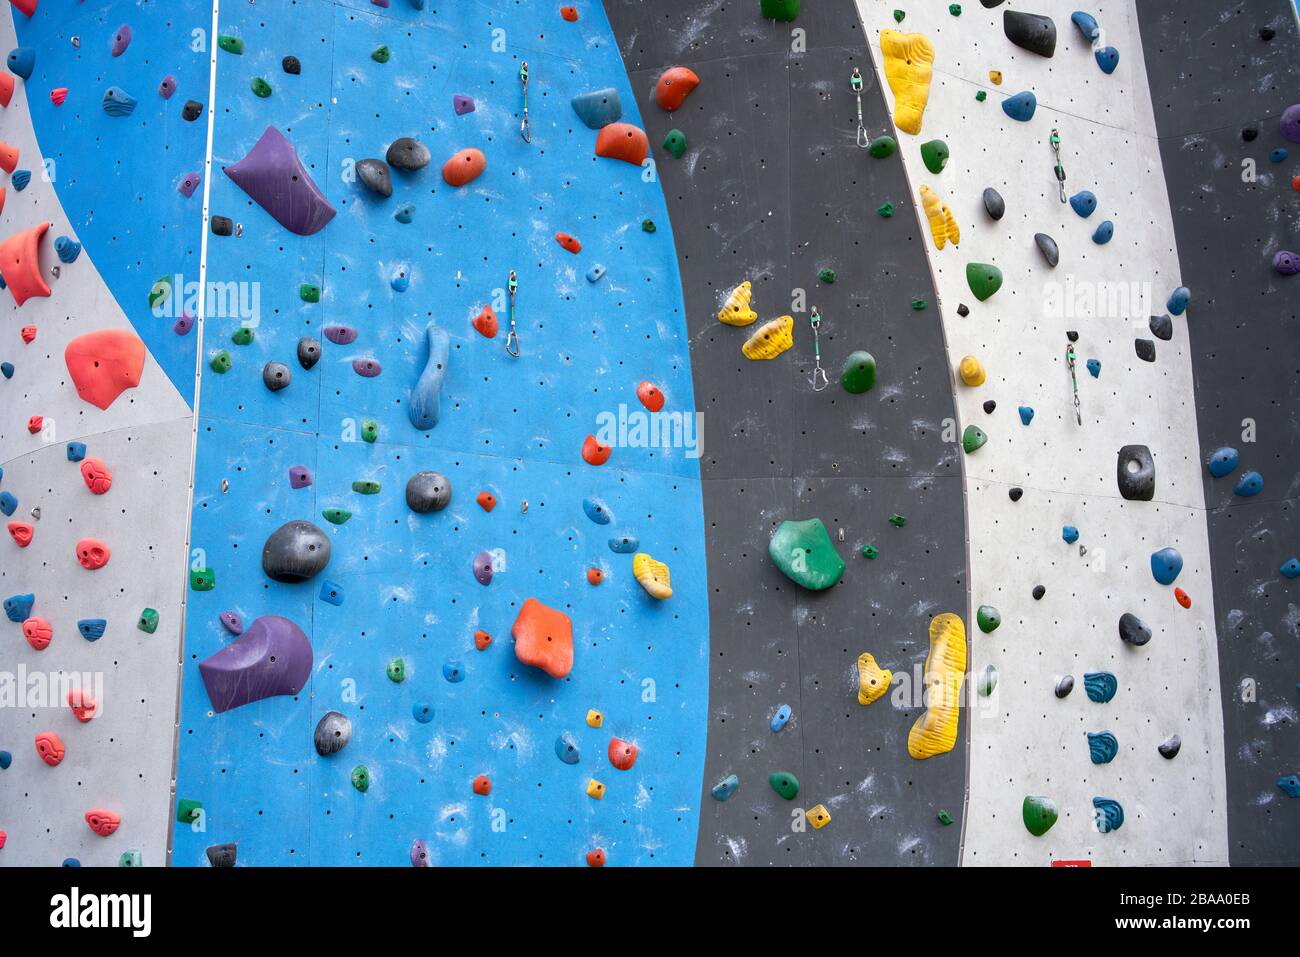 Climbing wall with colorful grips and holds Stock Photo